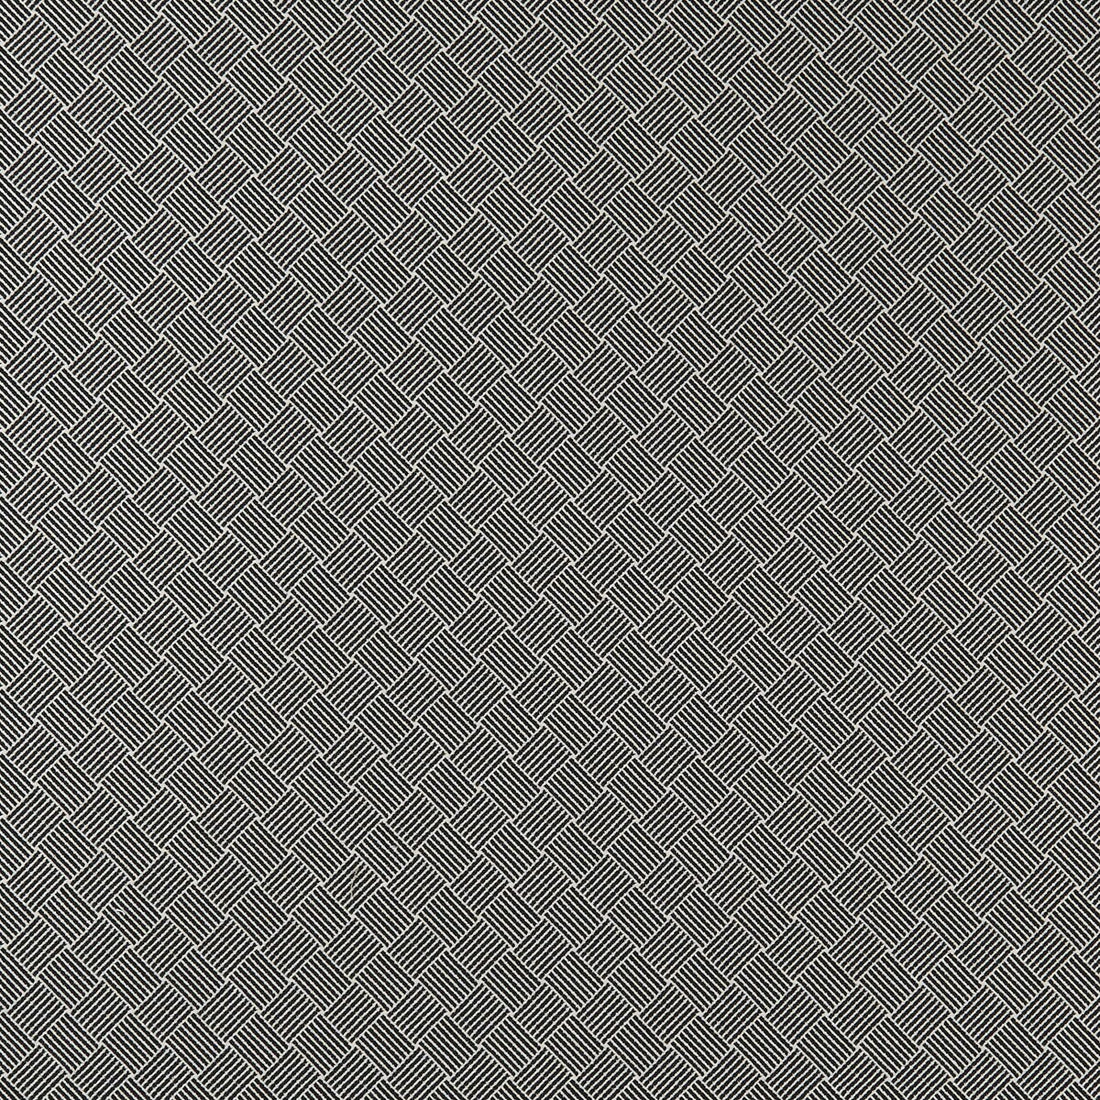 Bw1031 fabric in black/white color - pattern F0904/01.CAC.0 - by Clarke And Clarke in the Clarke &amp; Clarke Black + White collection